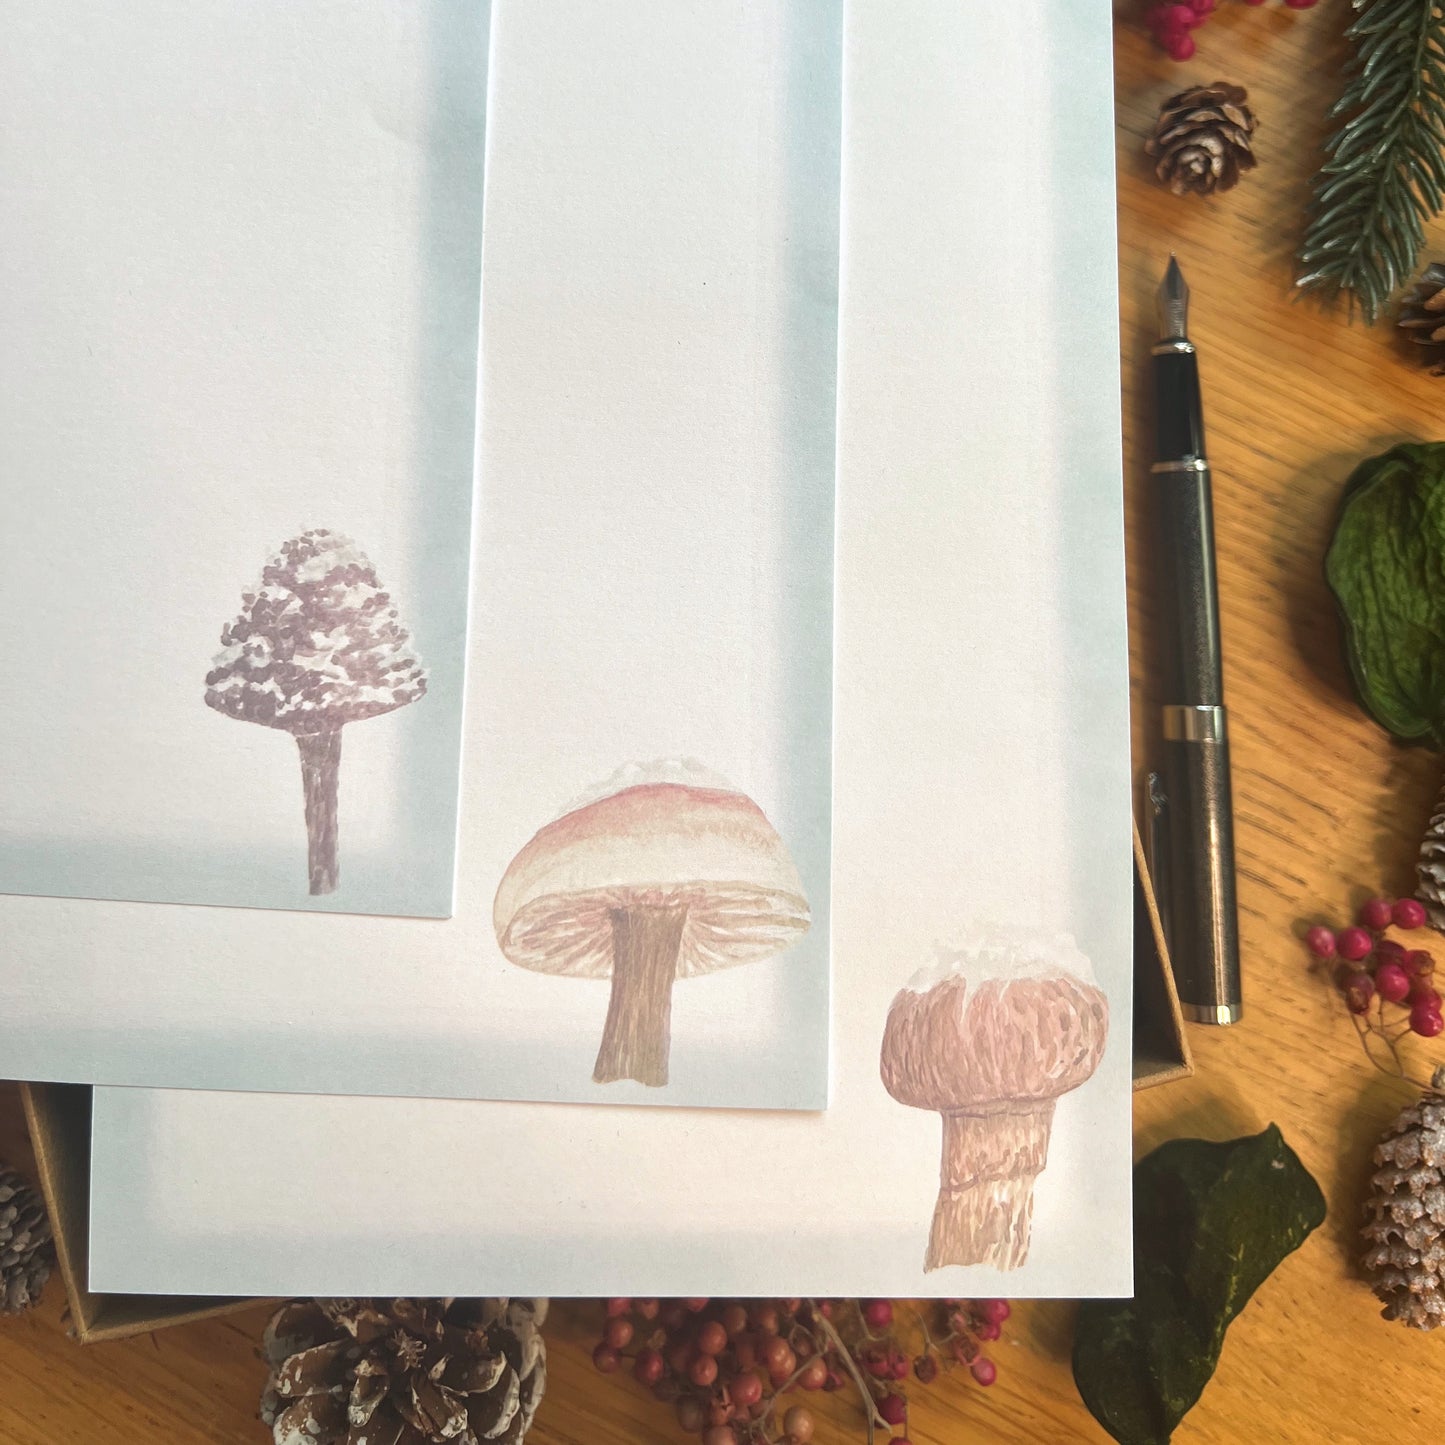 Winter wanderland illustrated paper set featuring snow topped mushrooms with an ice blue border, on a wooden desk